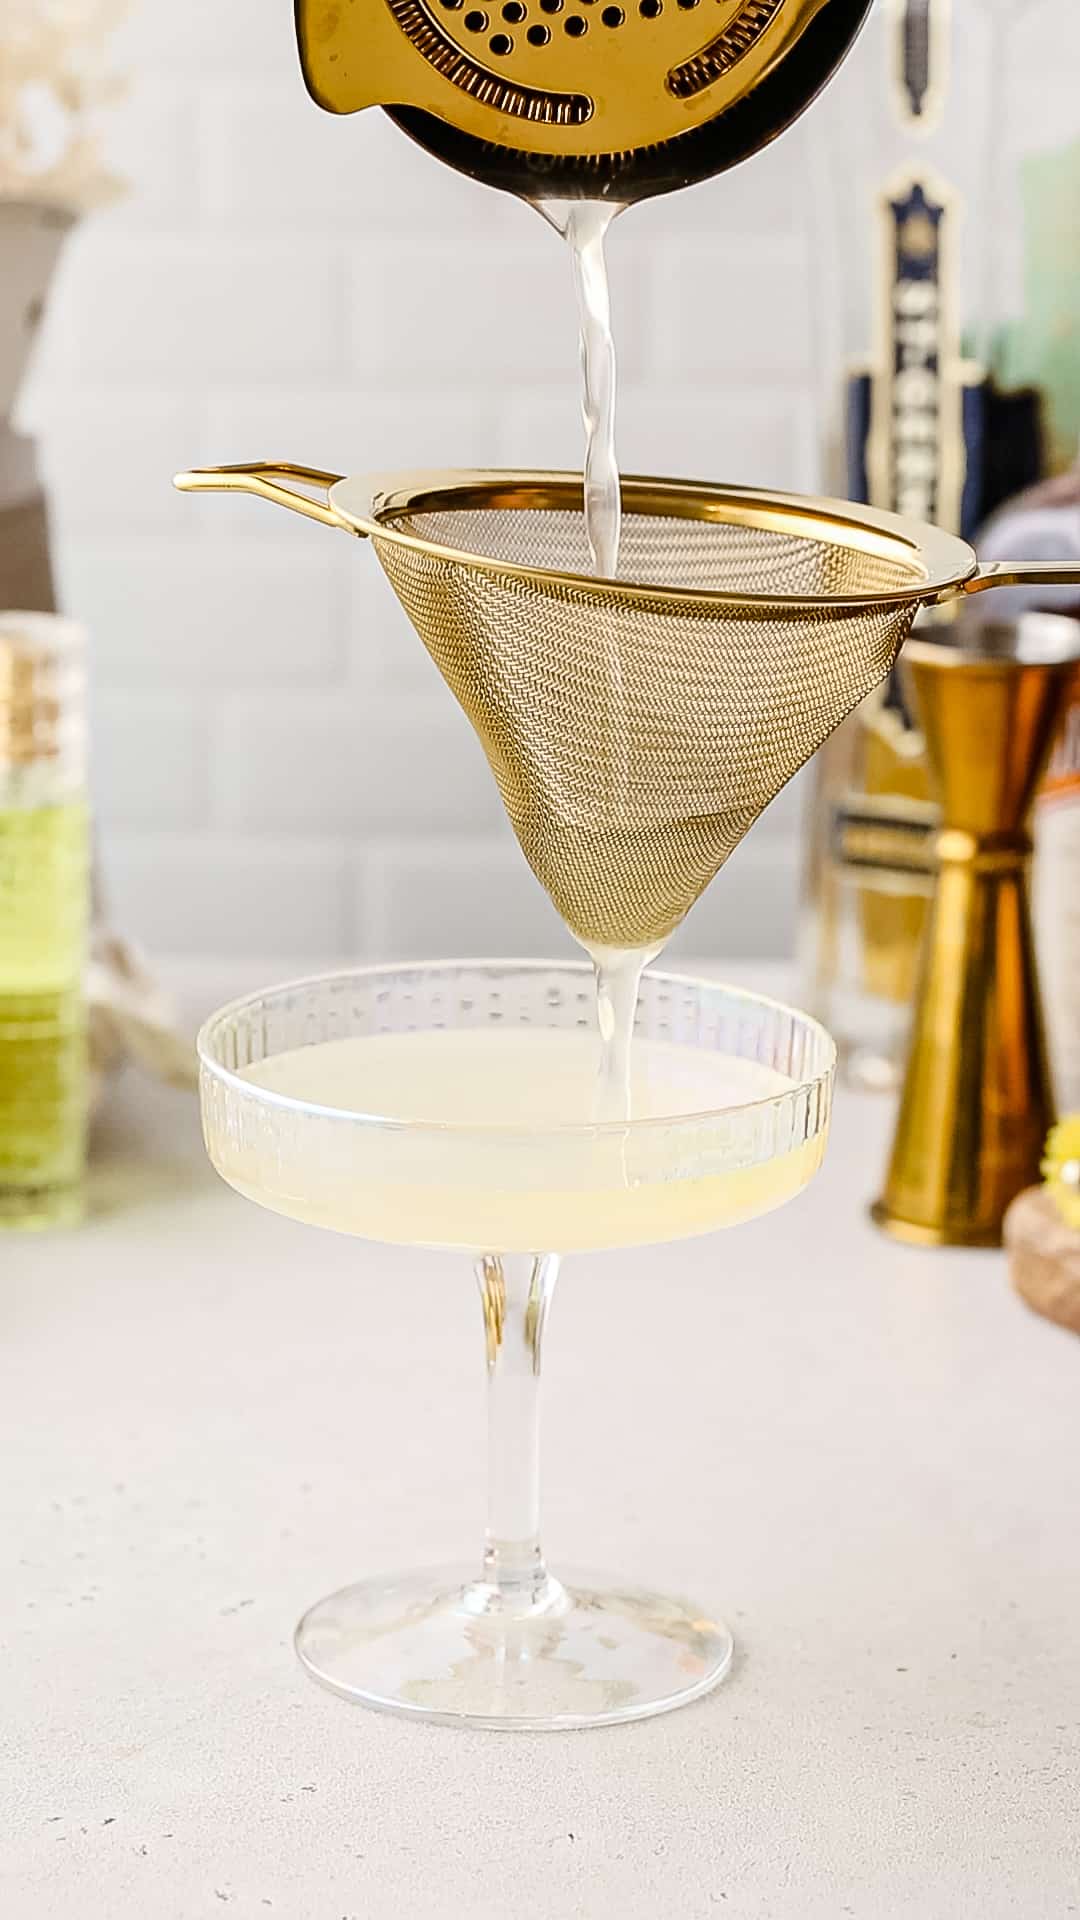 Straining a drink into a coupe cocktail glass.